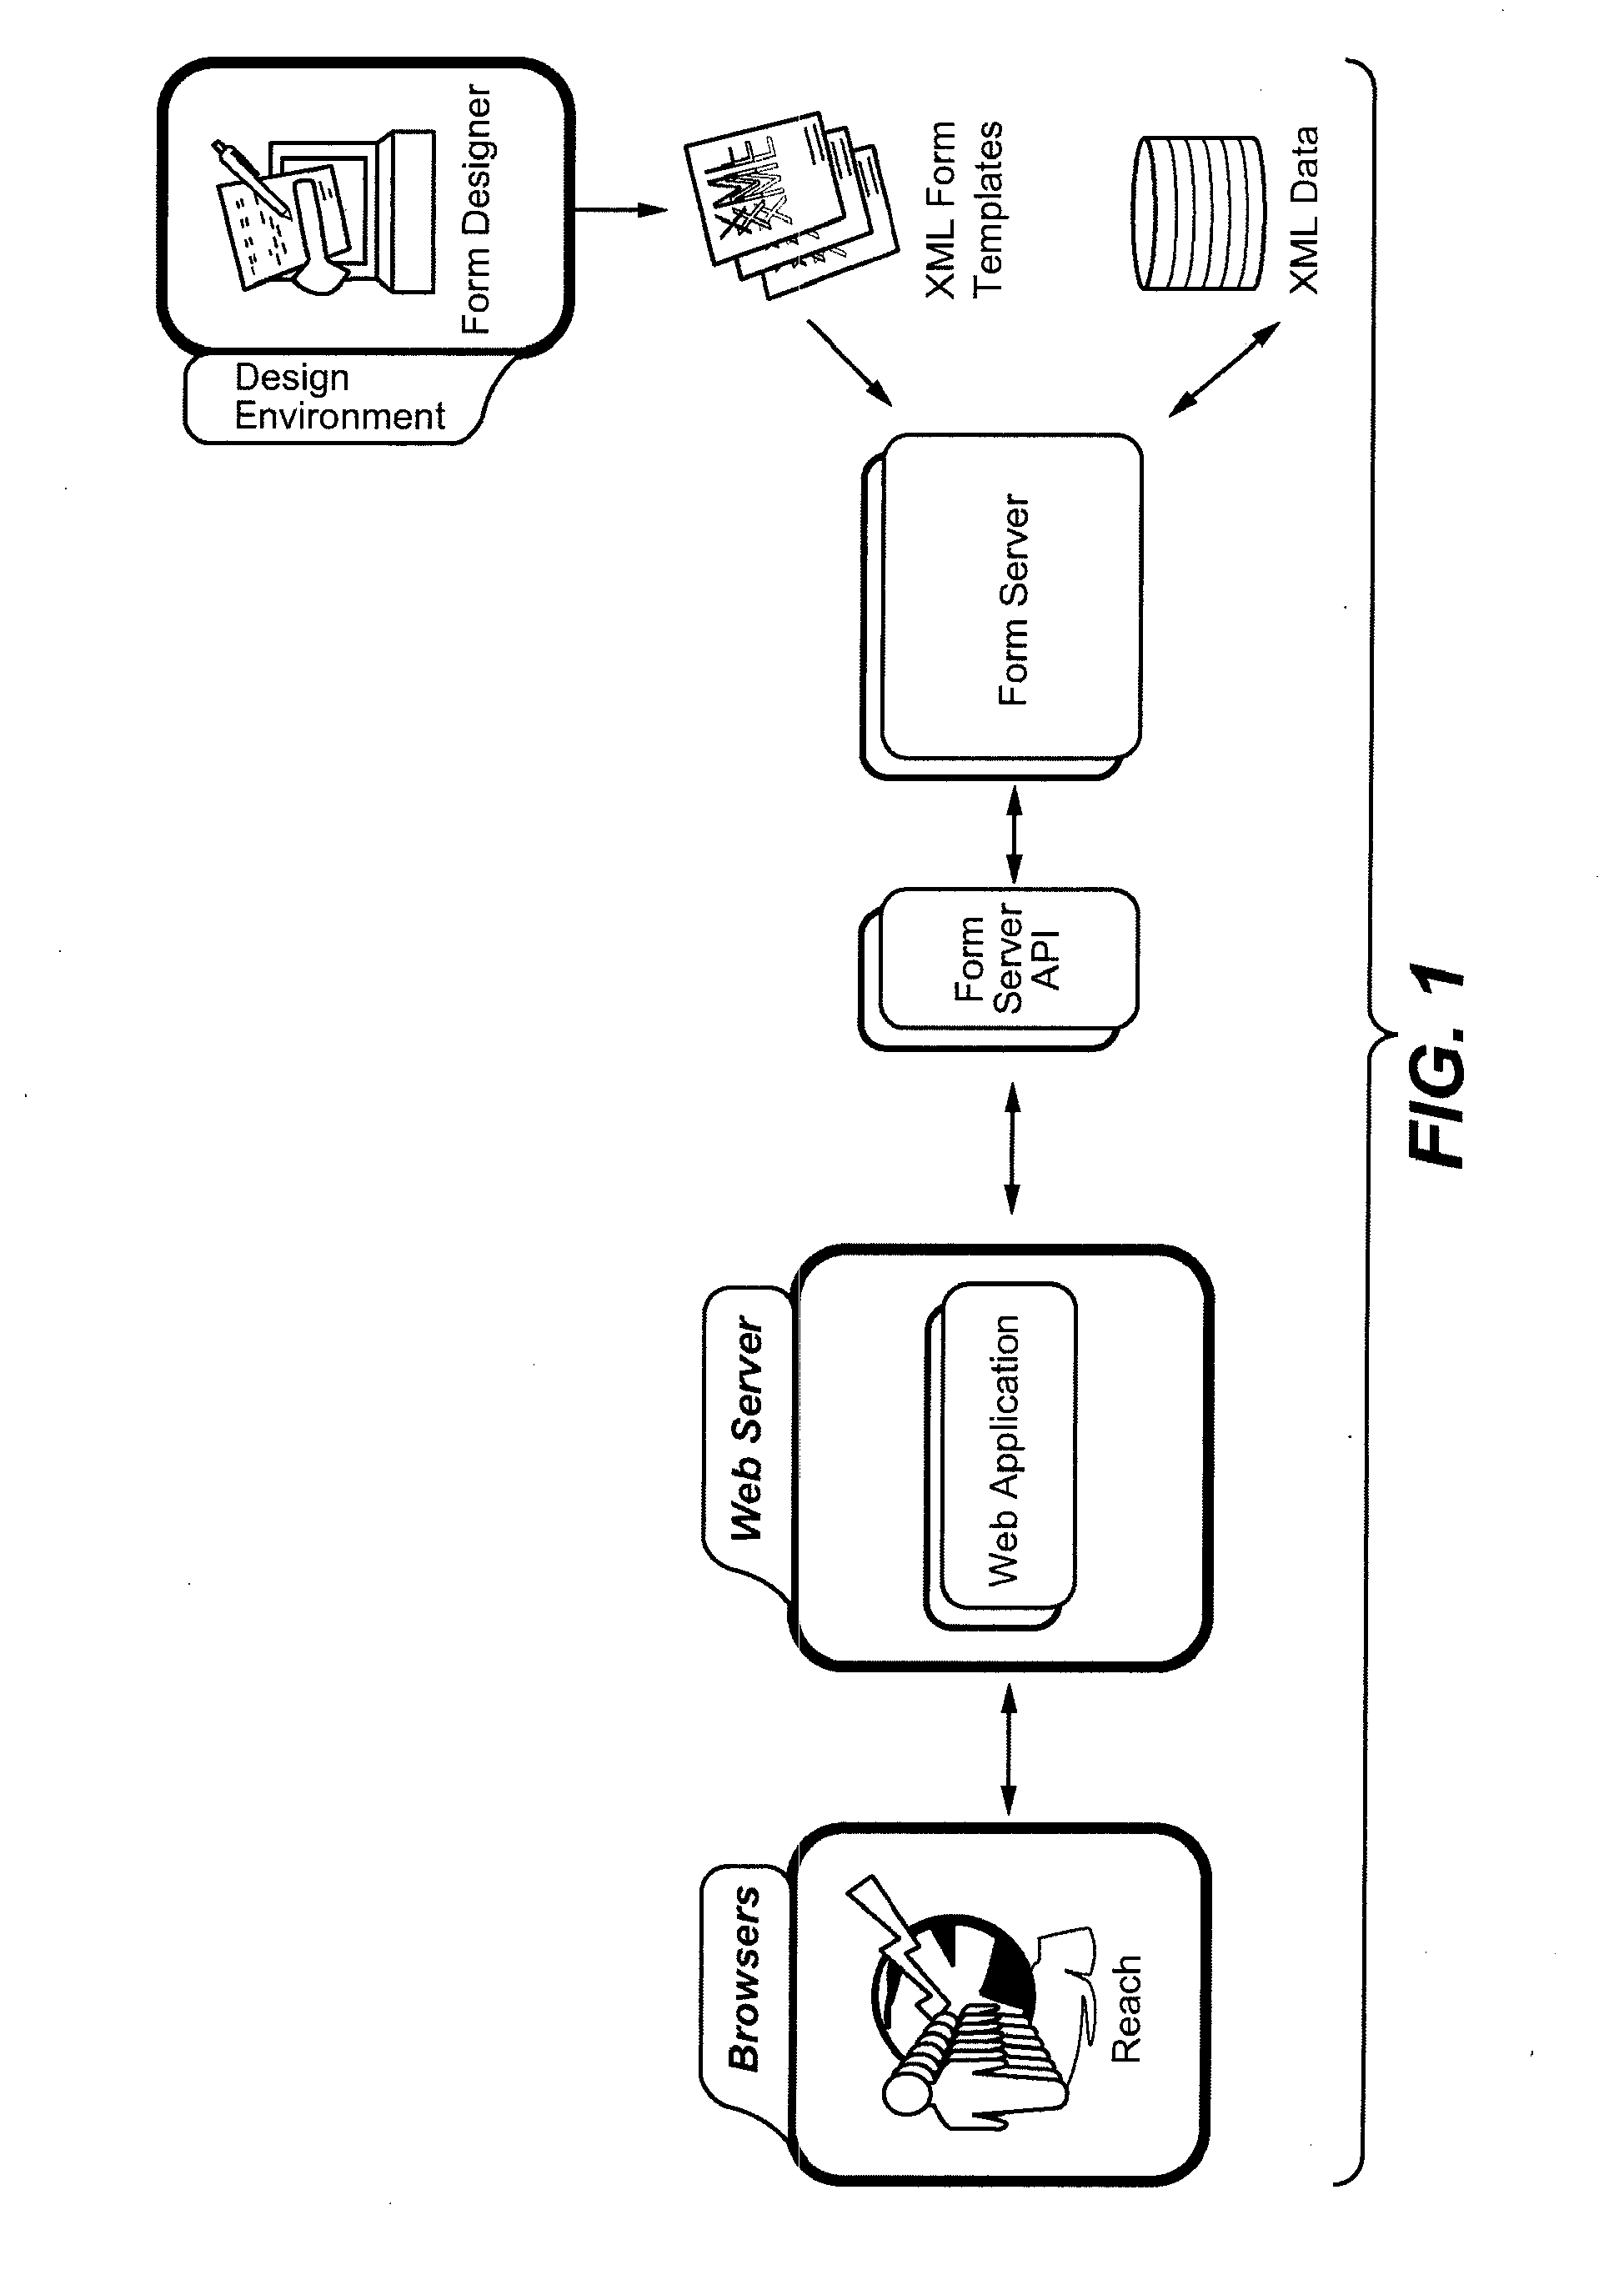 Method and System for Cross-Platform Form Creation and Deployment